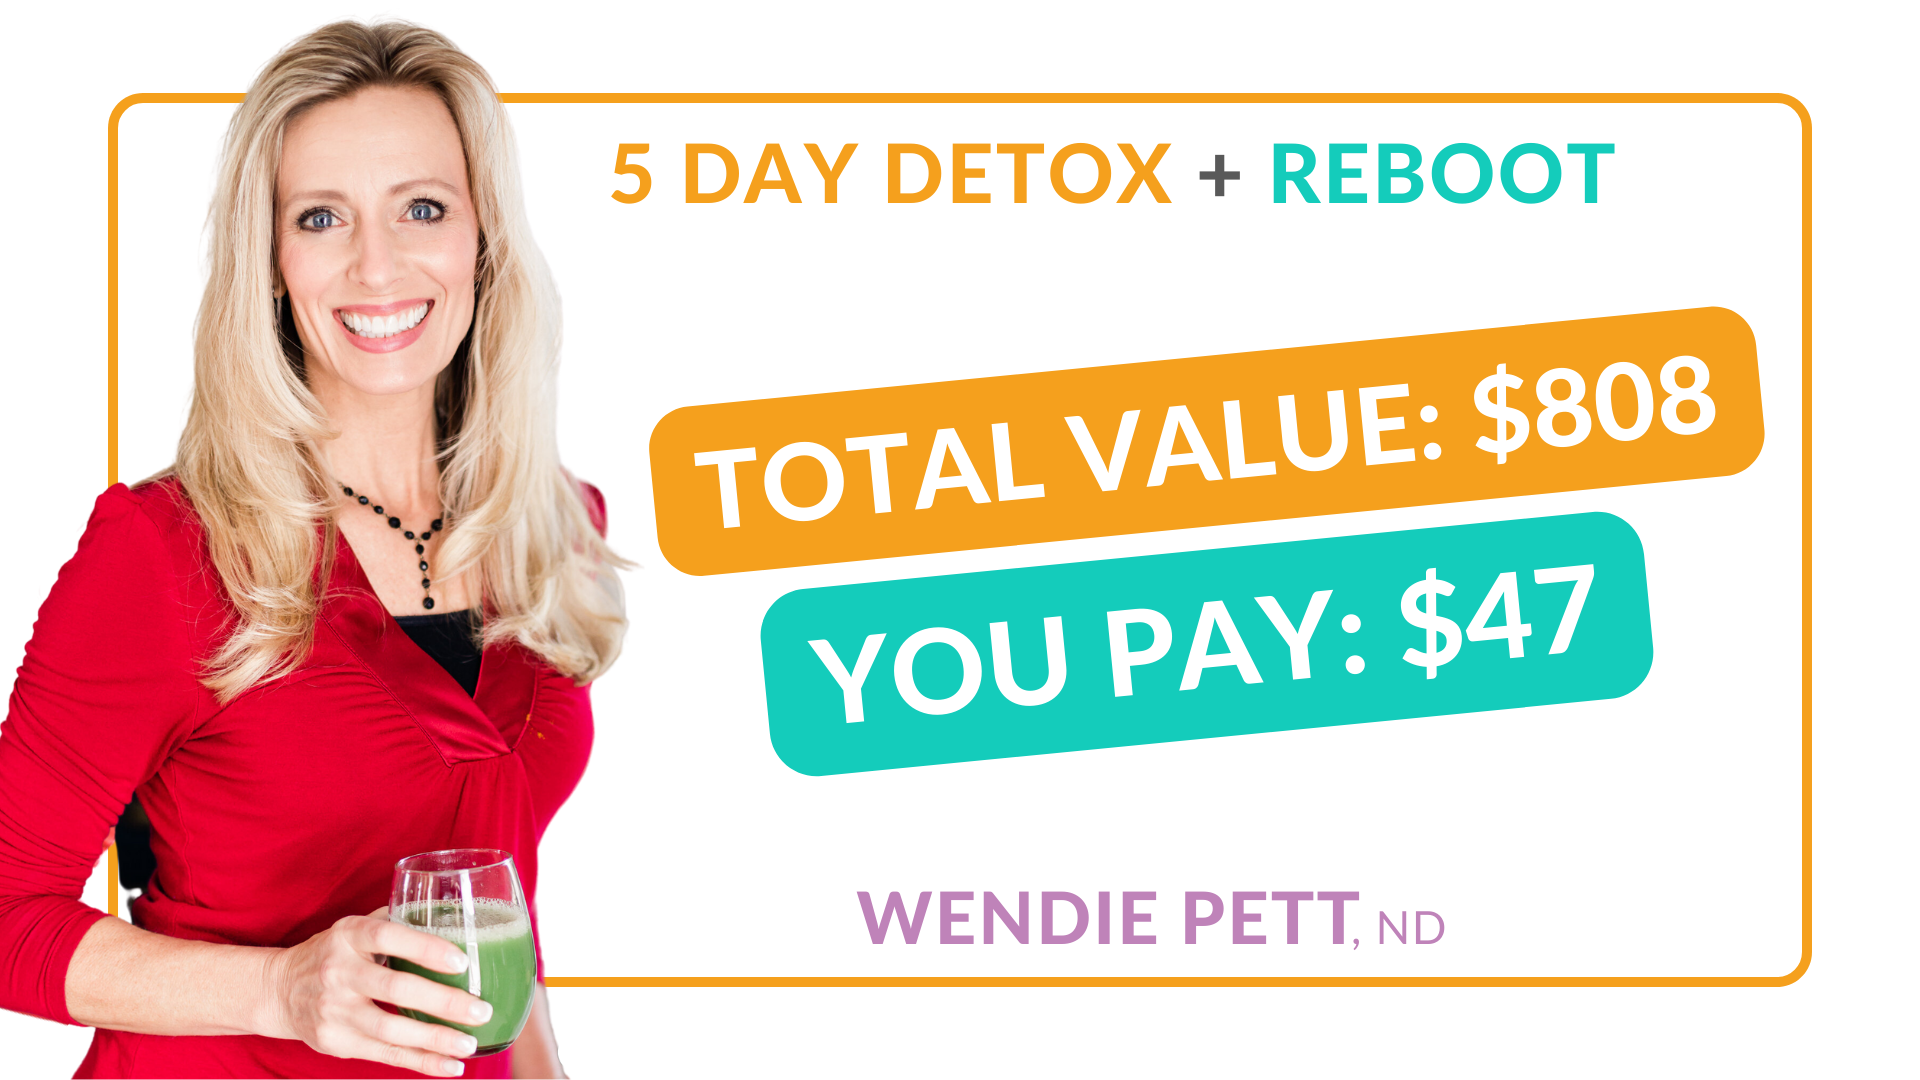 Over 80% OFF SALE! 5 Day Detox + Reboot with Wendie Pett, ND